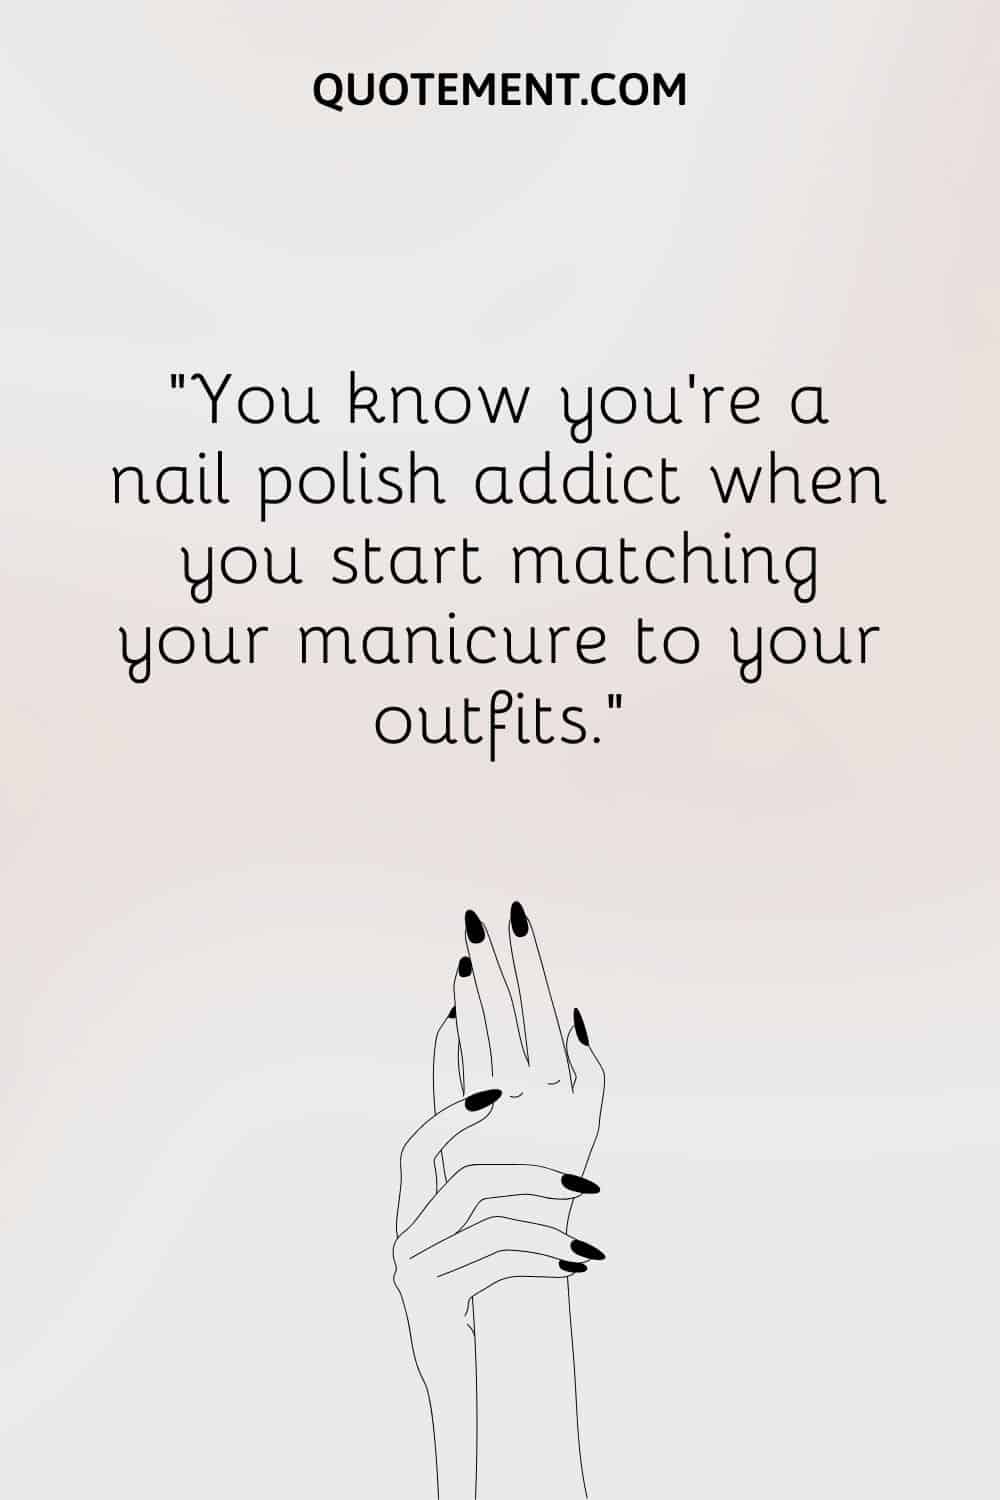 You know you’re a nail polish addict when you start matching your manicure to your outfits